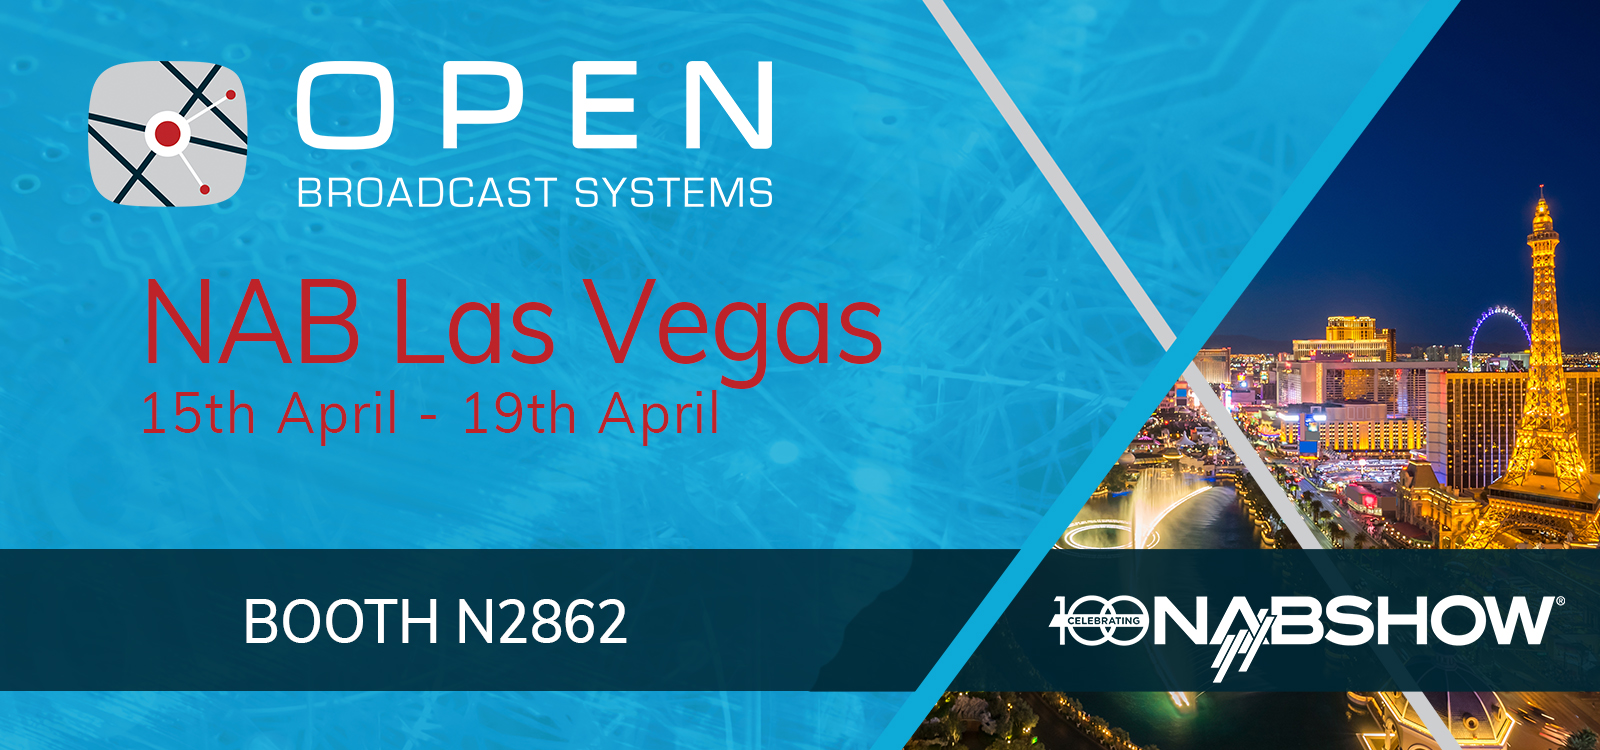 Meet Open Broadcast Systems at NAB